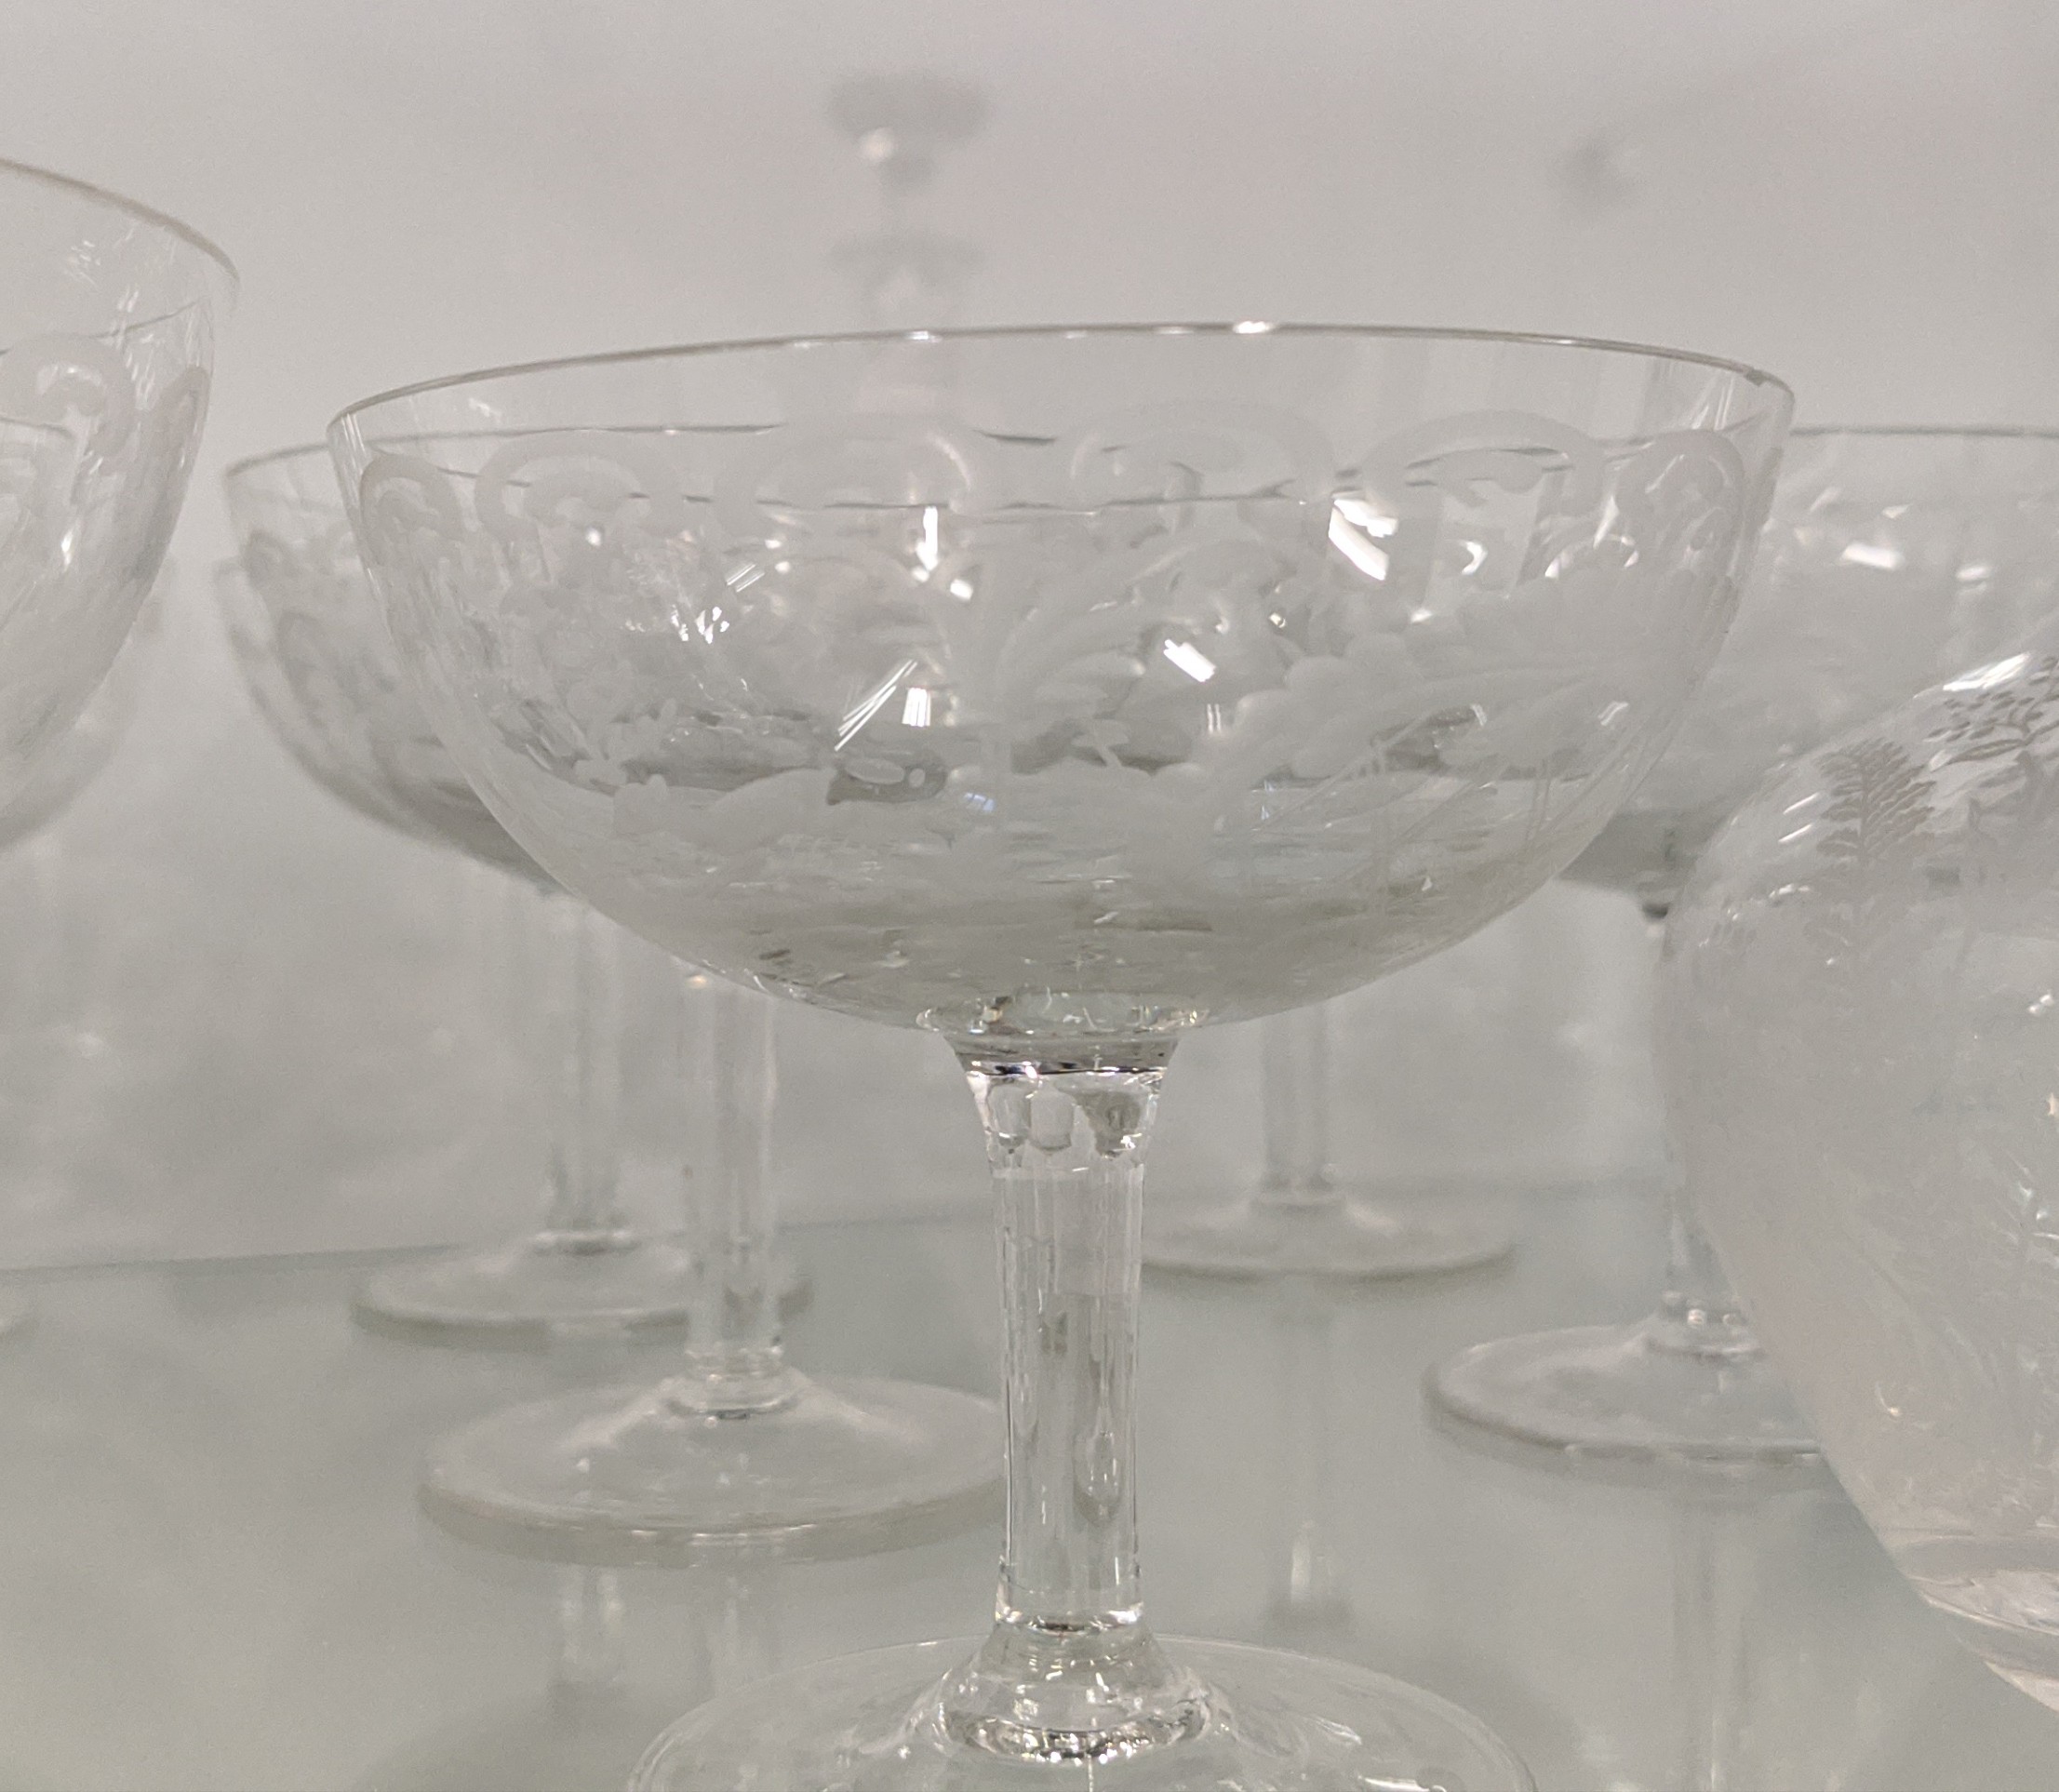 QUANTITY OF ENGRAVED GLASSWARE, including eight champagne flutes, decanter vodka glass set, eight - Image 5 of 9